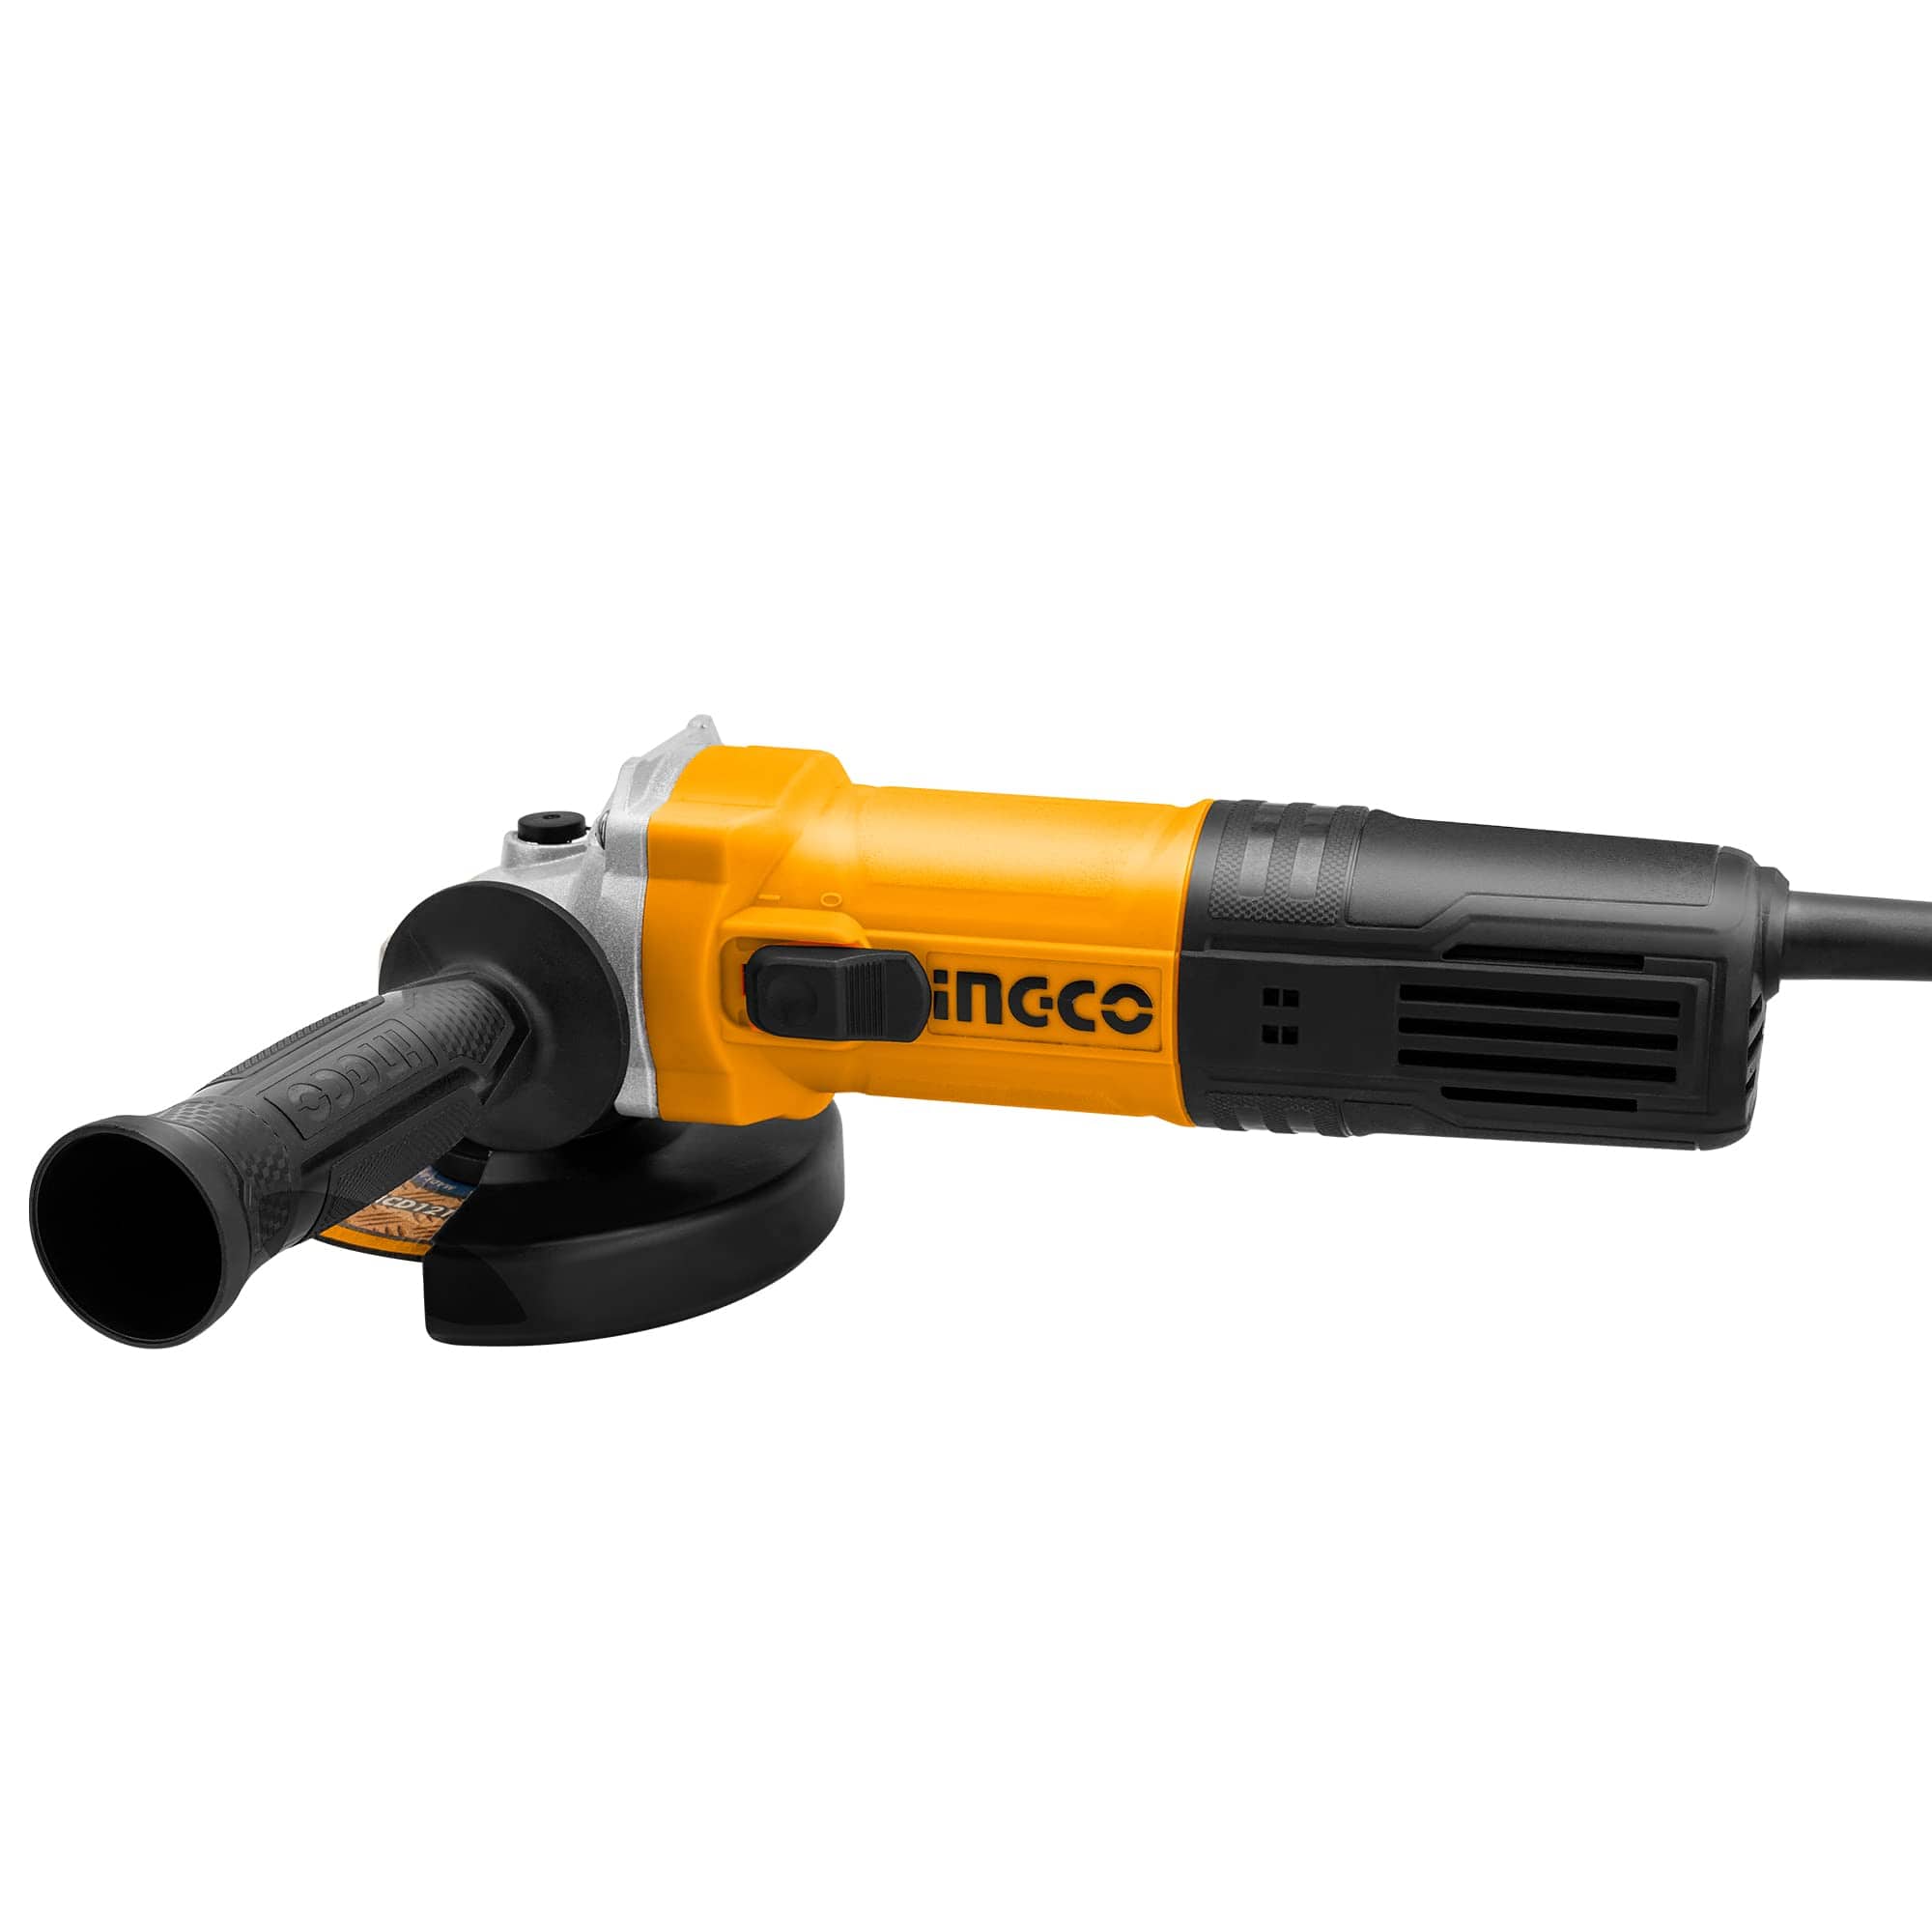 Ingco 4.5"/115mm Angle Grinder 850W - AG85038 | Supply Master | Accra, Ghana Grinder Buy Tools hardware Building materials